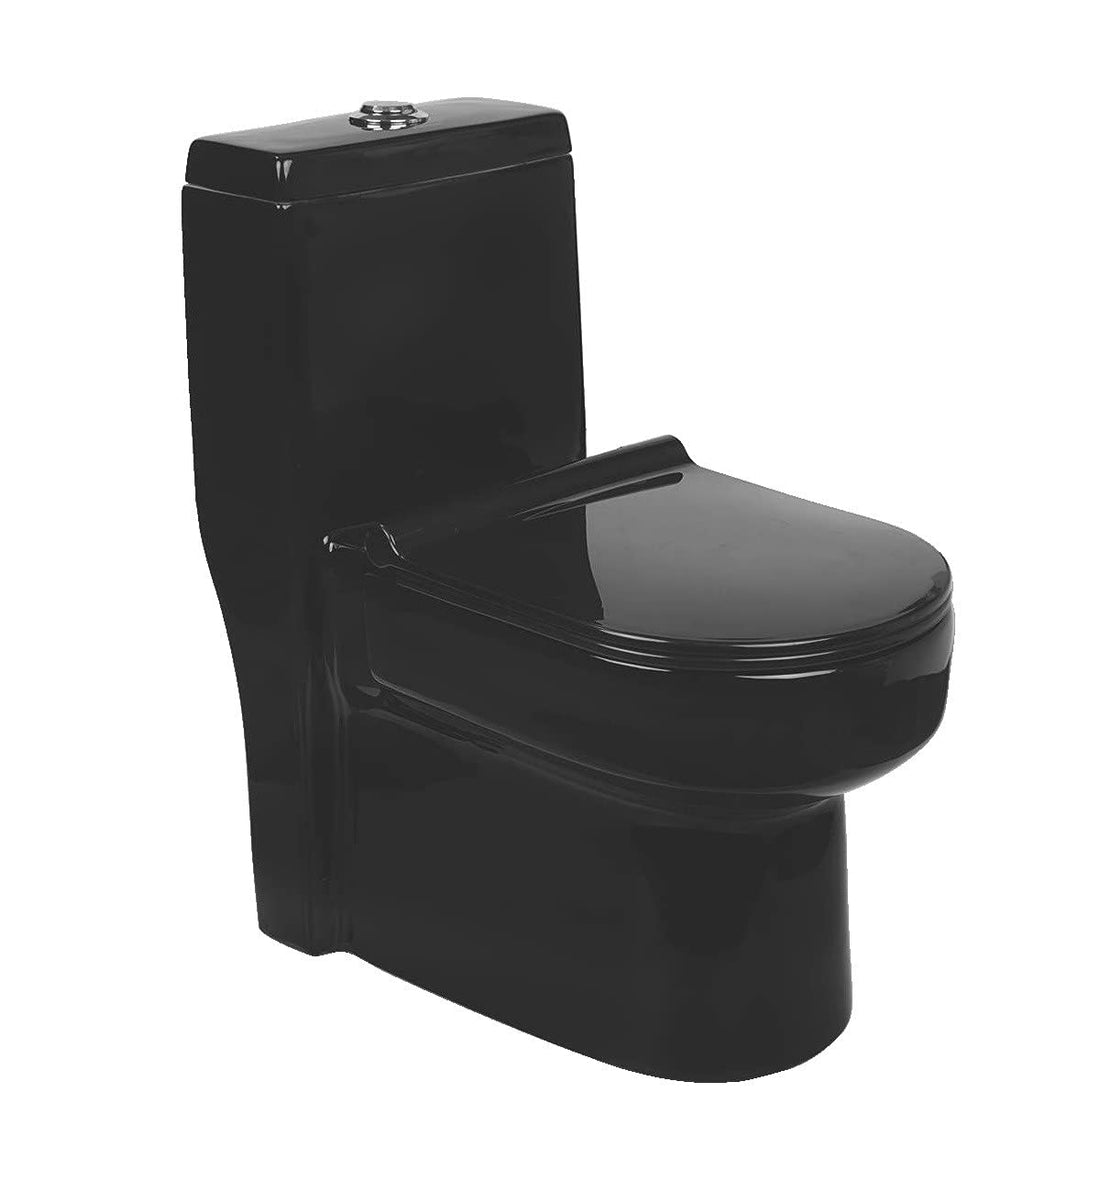 one piece toilet commode black color